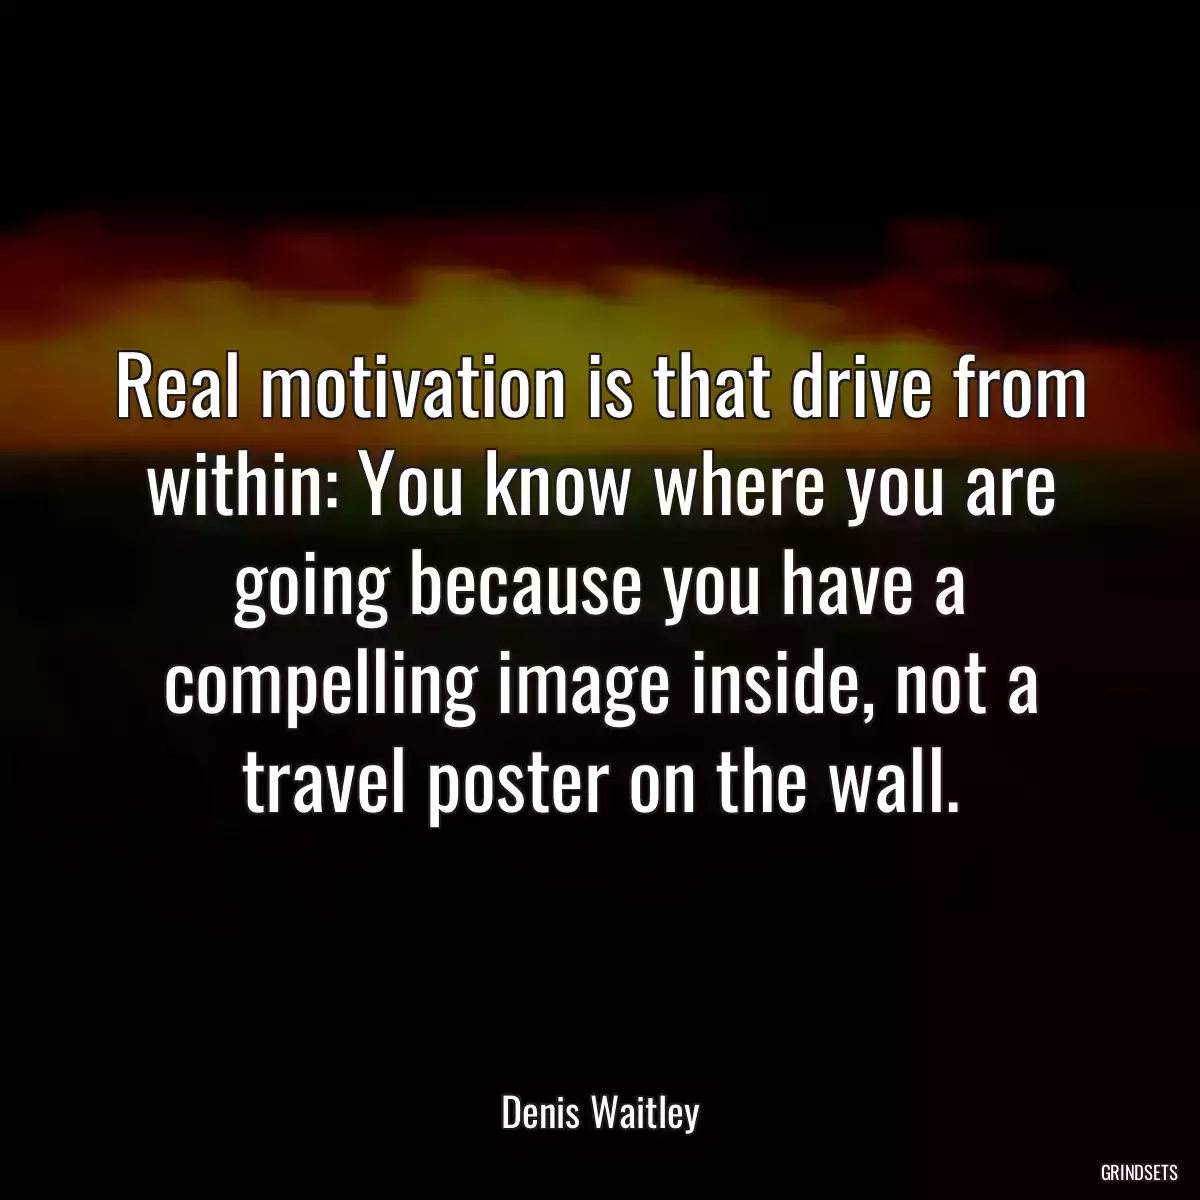 Real motivation is that drive from within: You know where you are going because you have a compelling image inside, not a travel poster on the wall.